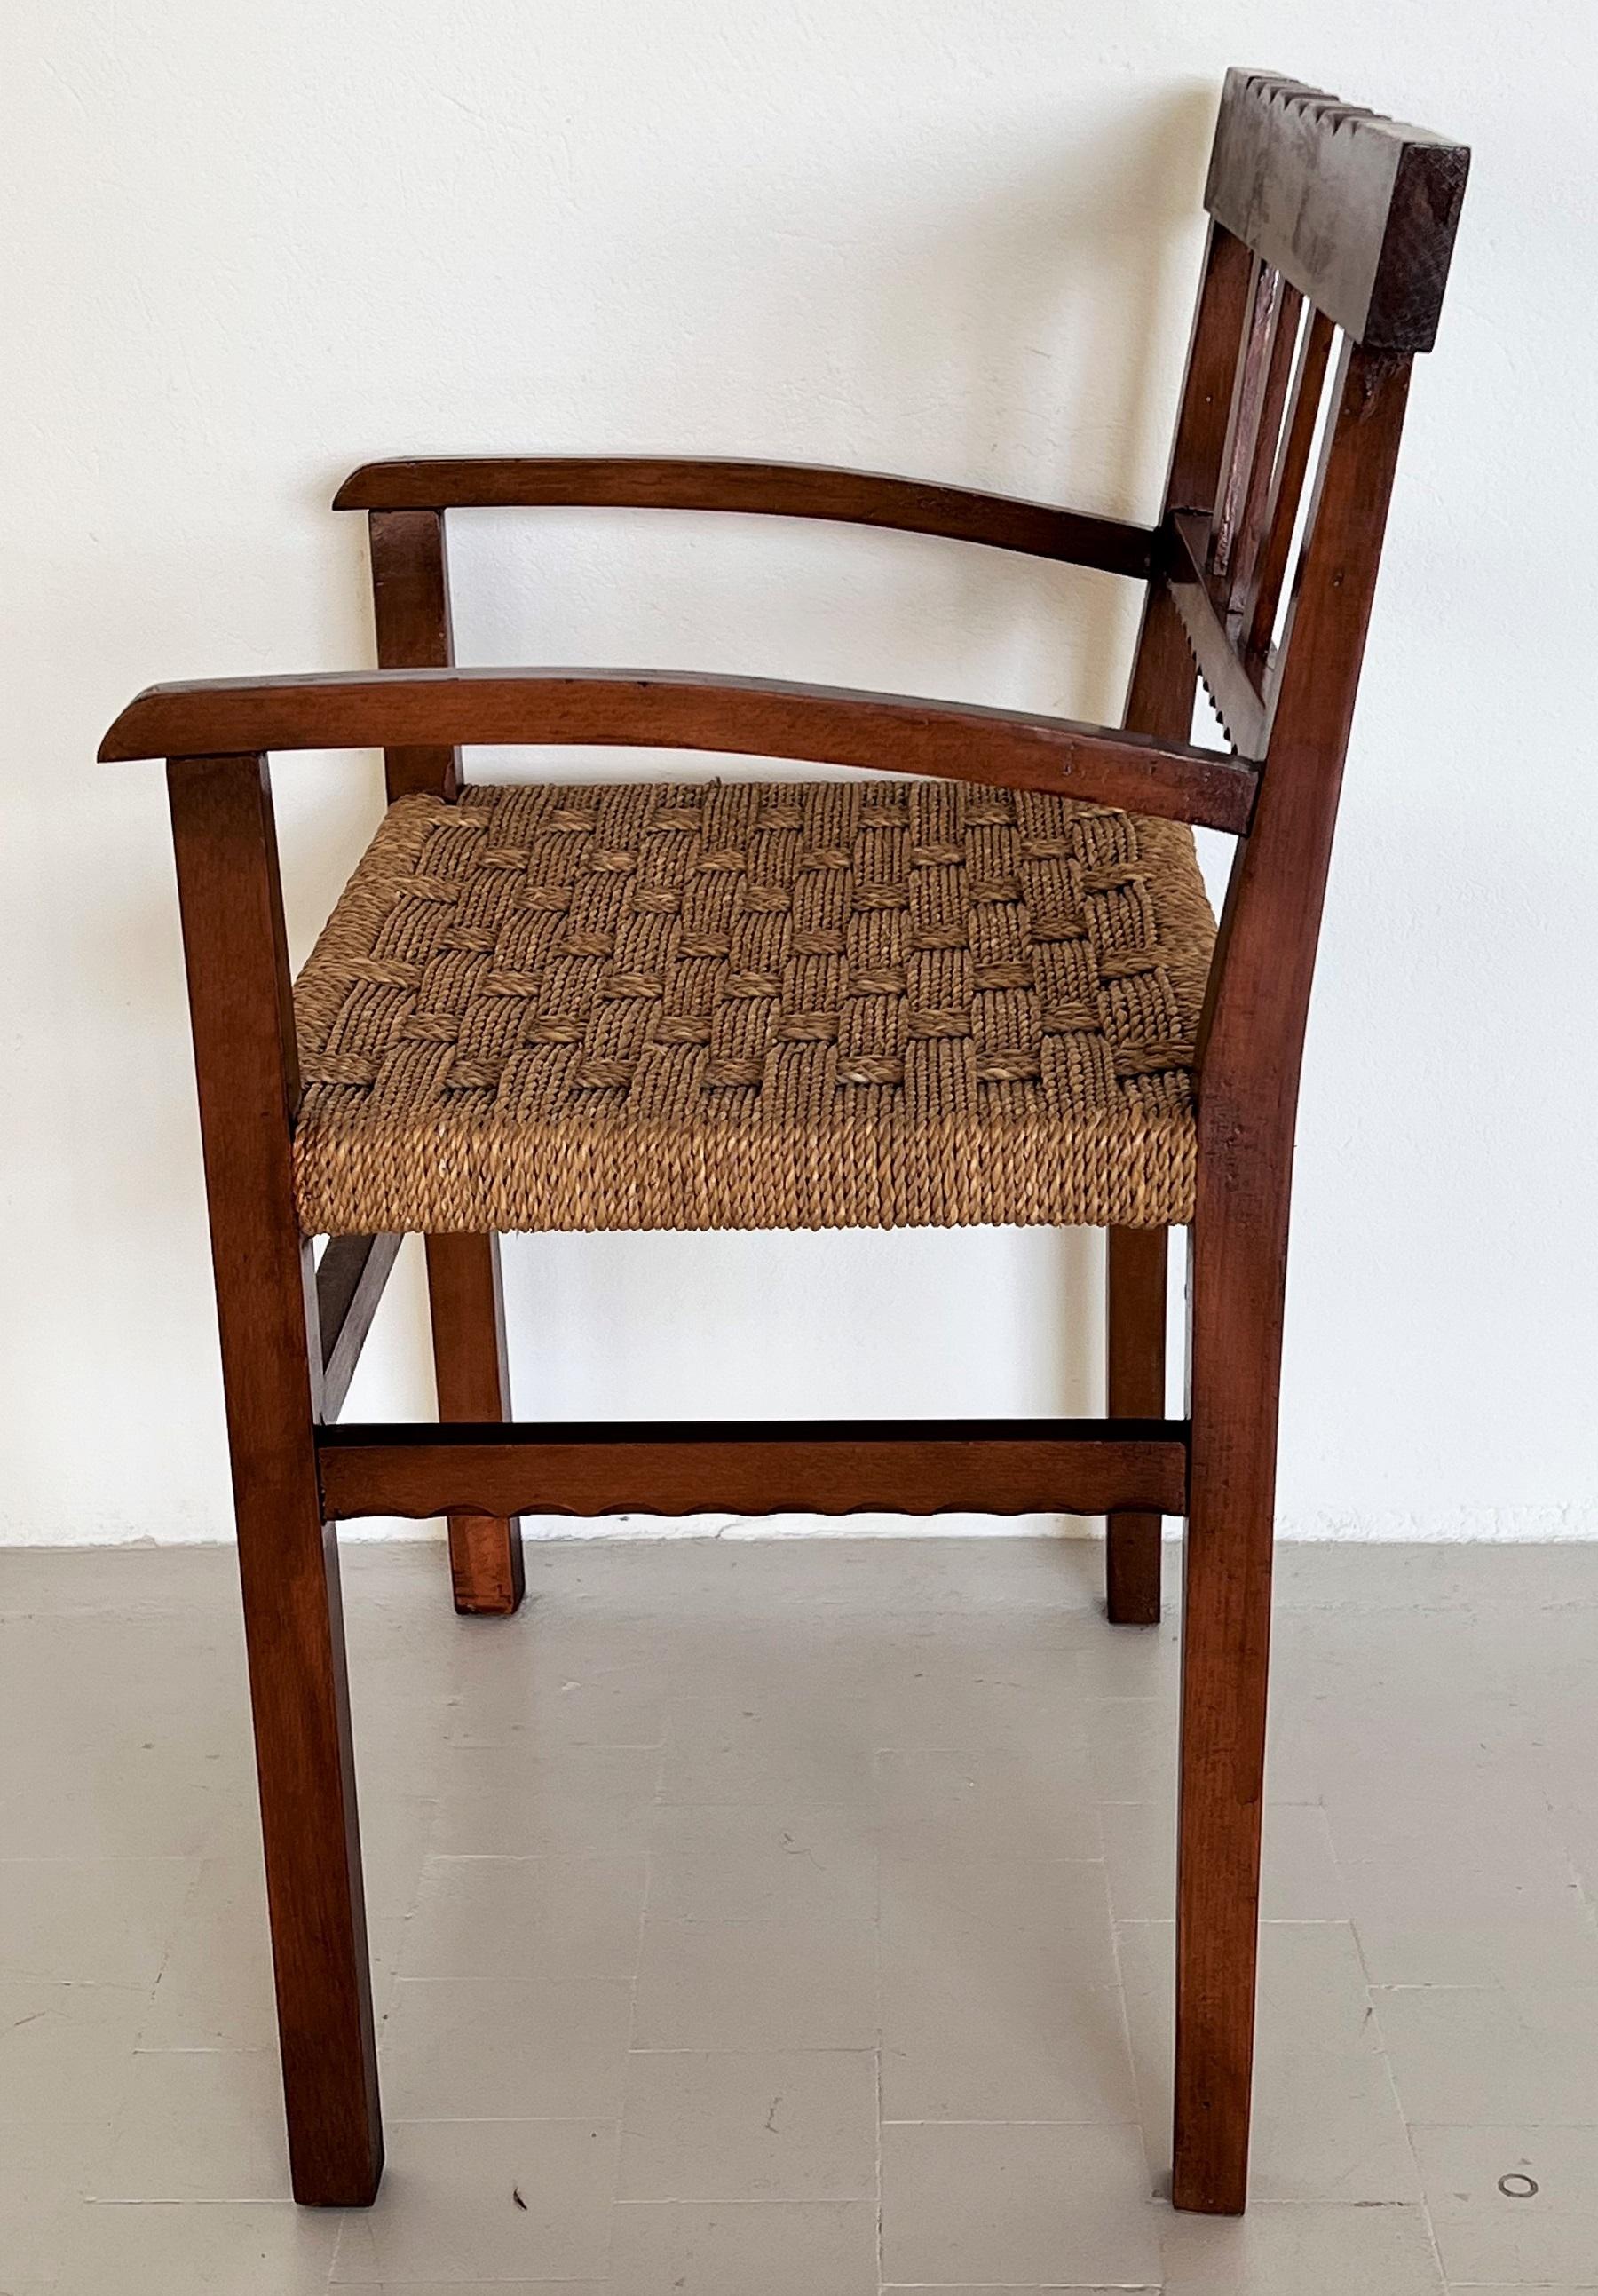 Late 20th Century Italian Classic Large Beechwood Chair with Hand-Crafted Rope Seat, 1980s For Sale